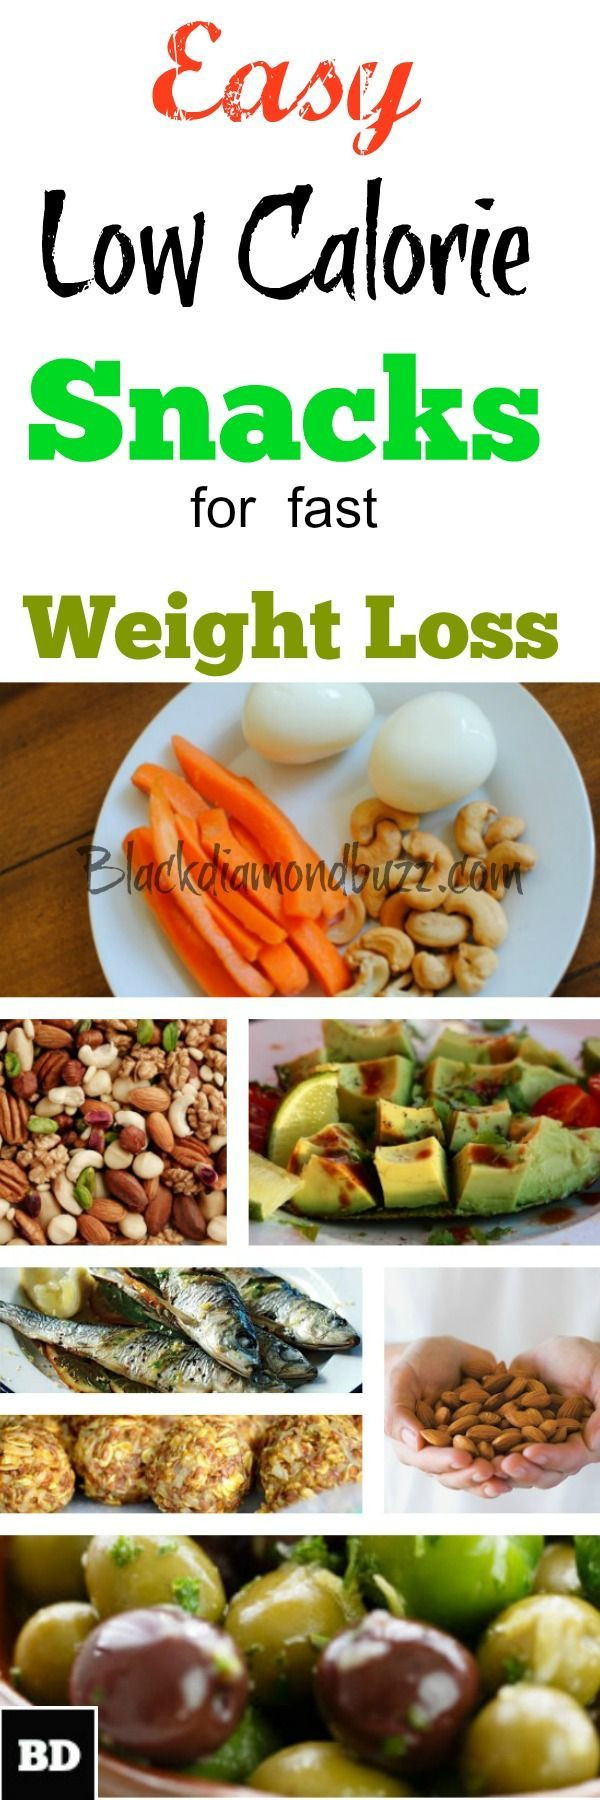 Healthy Snacks For Weight Loss
 Best 25 Weight loss snacks ideas on Pinterest